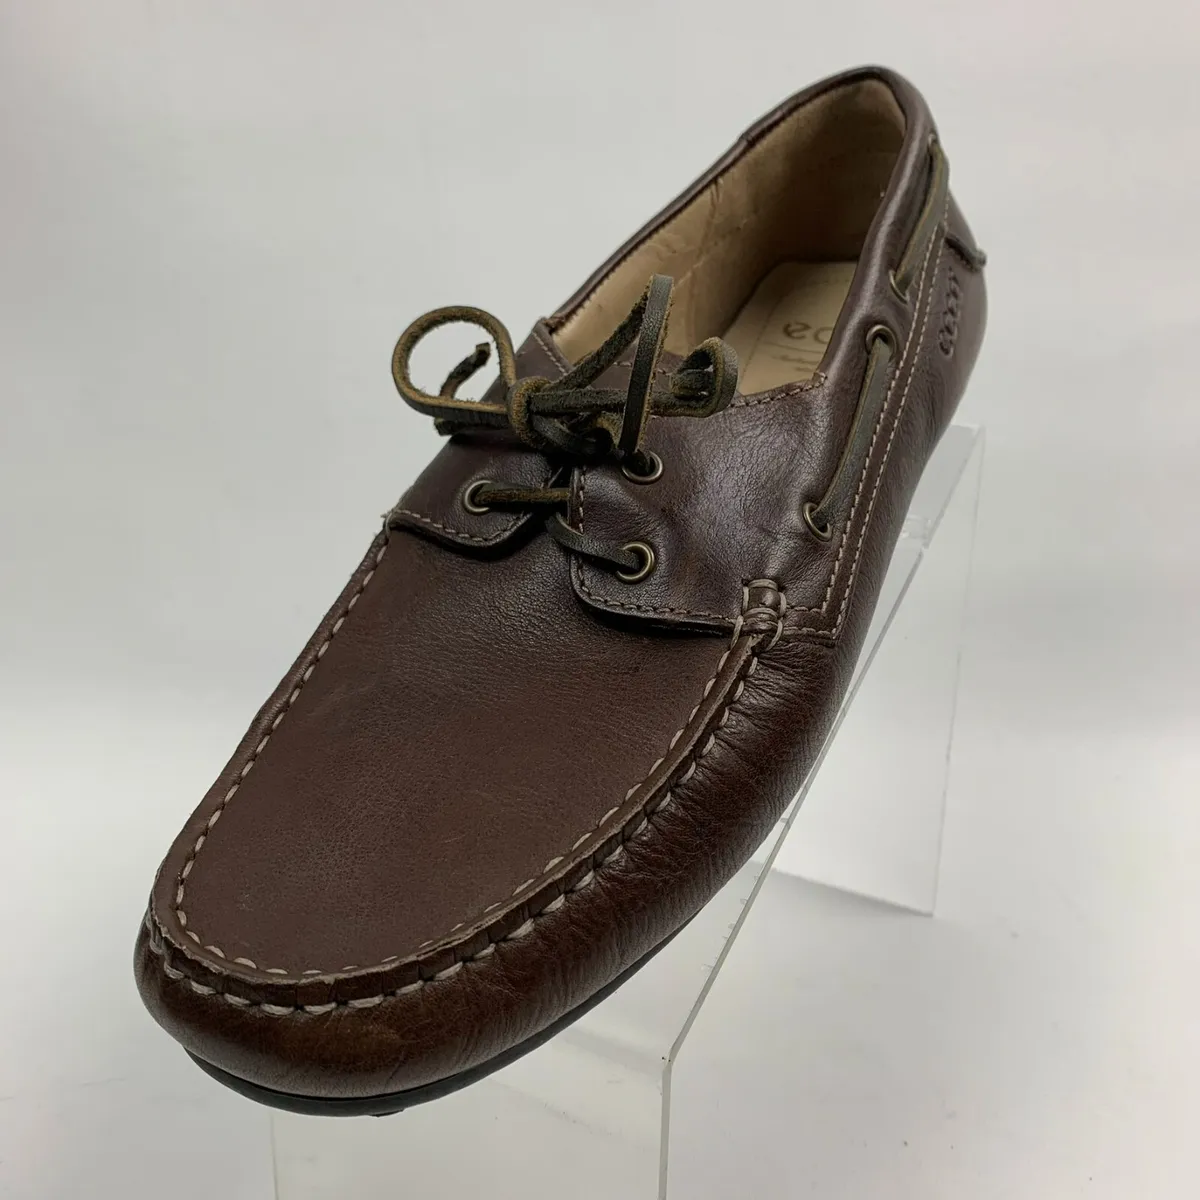 ECCO Boat Driving Brown Leather Moc Round Toe Lace Up Size EU46 US 12-12.5 | eBay